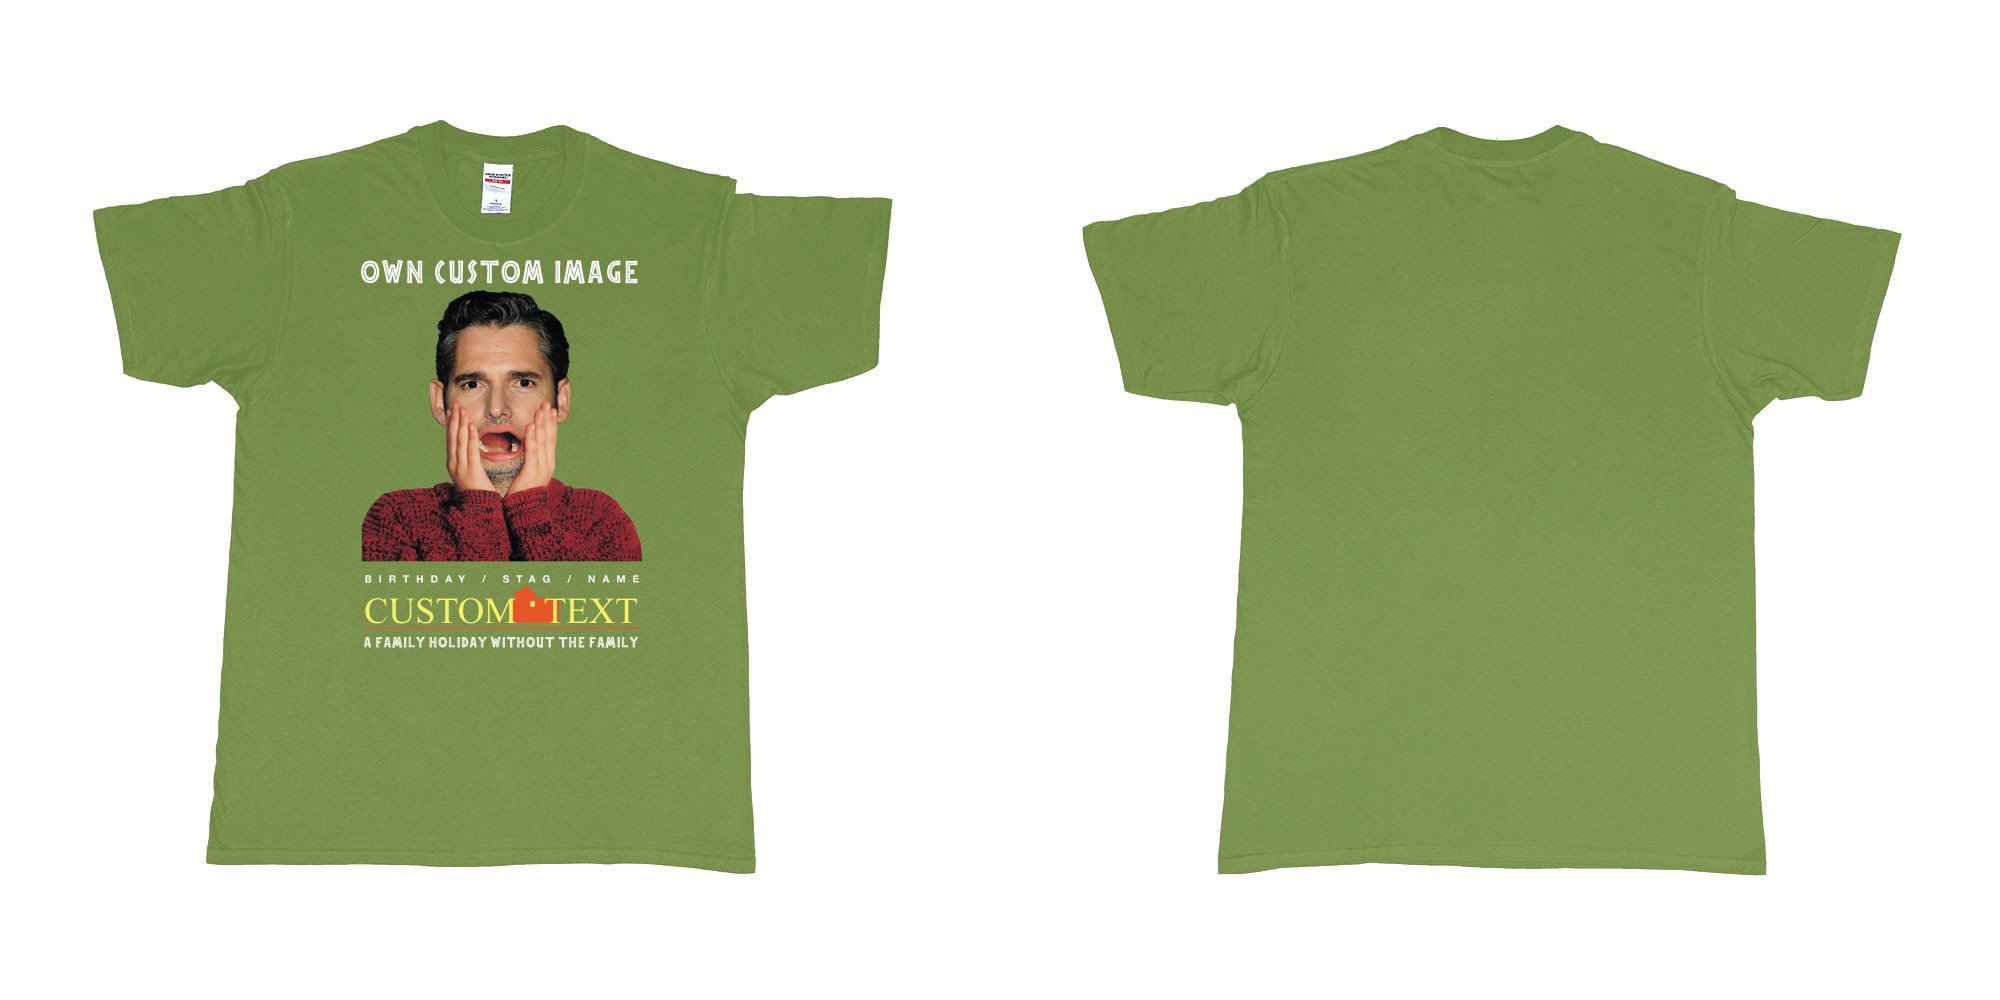 Custom tshirt design home alone custom image in fabric color military-green choice your own text made in Bali by The Pirate Way